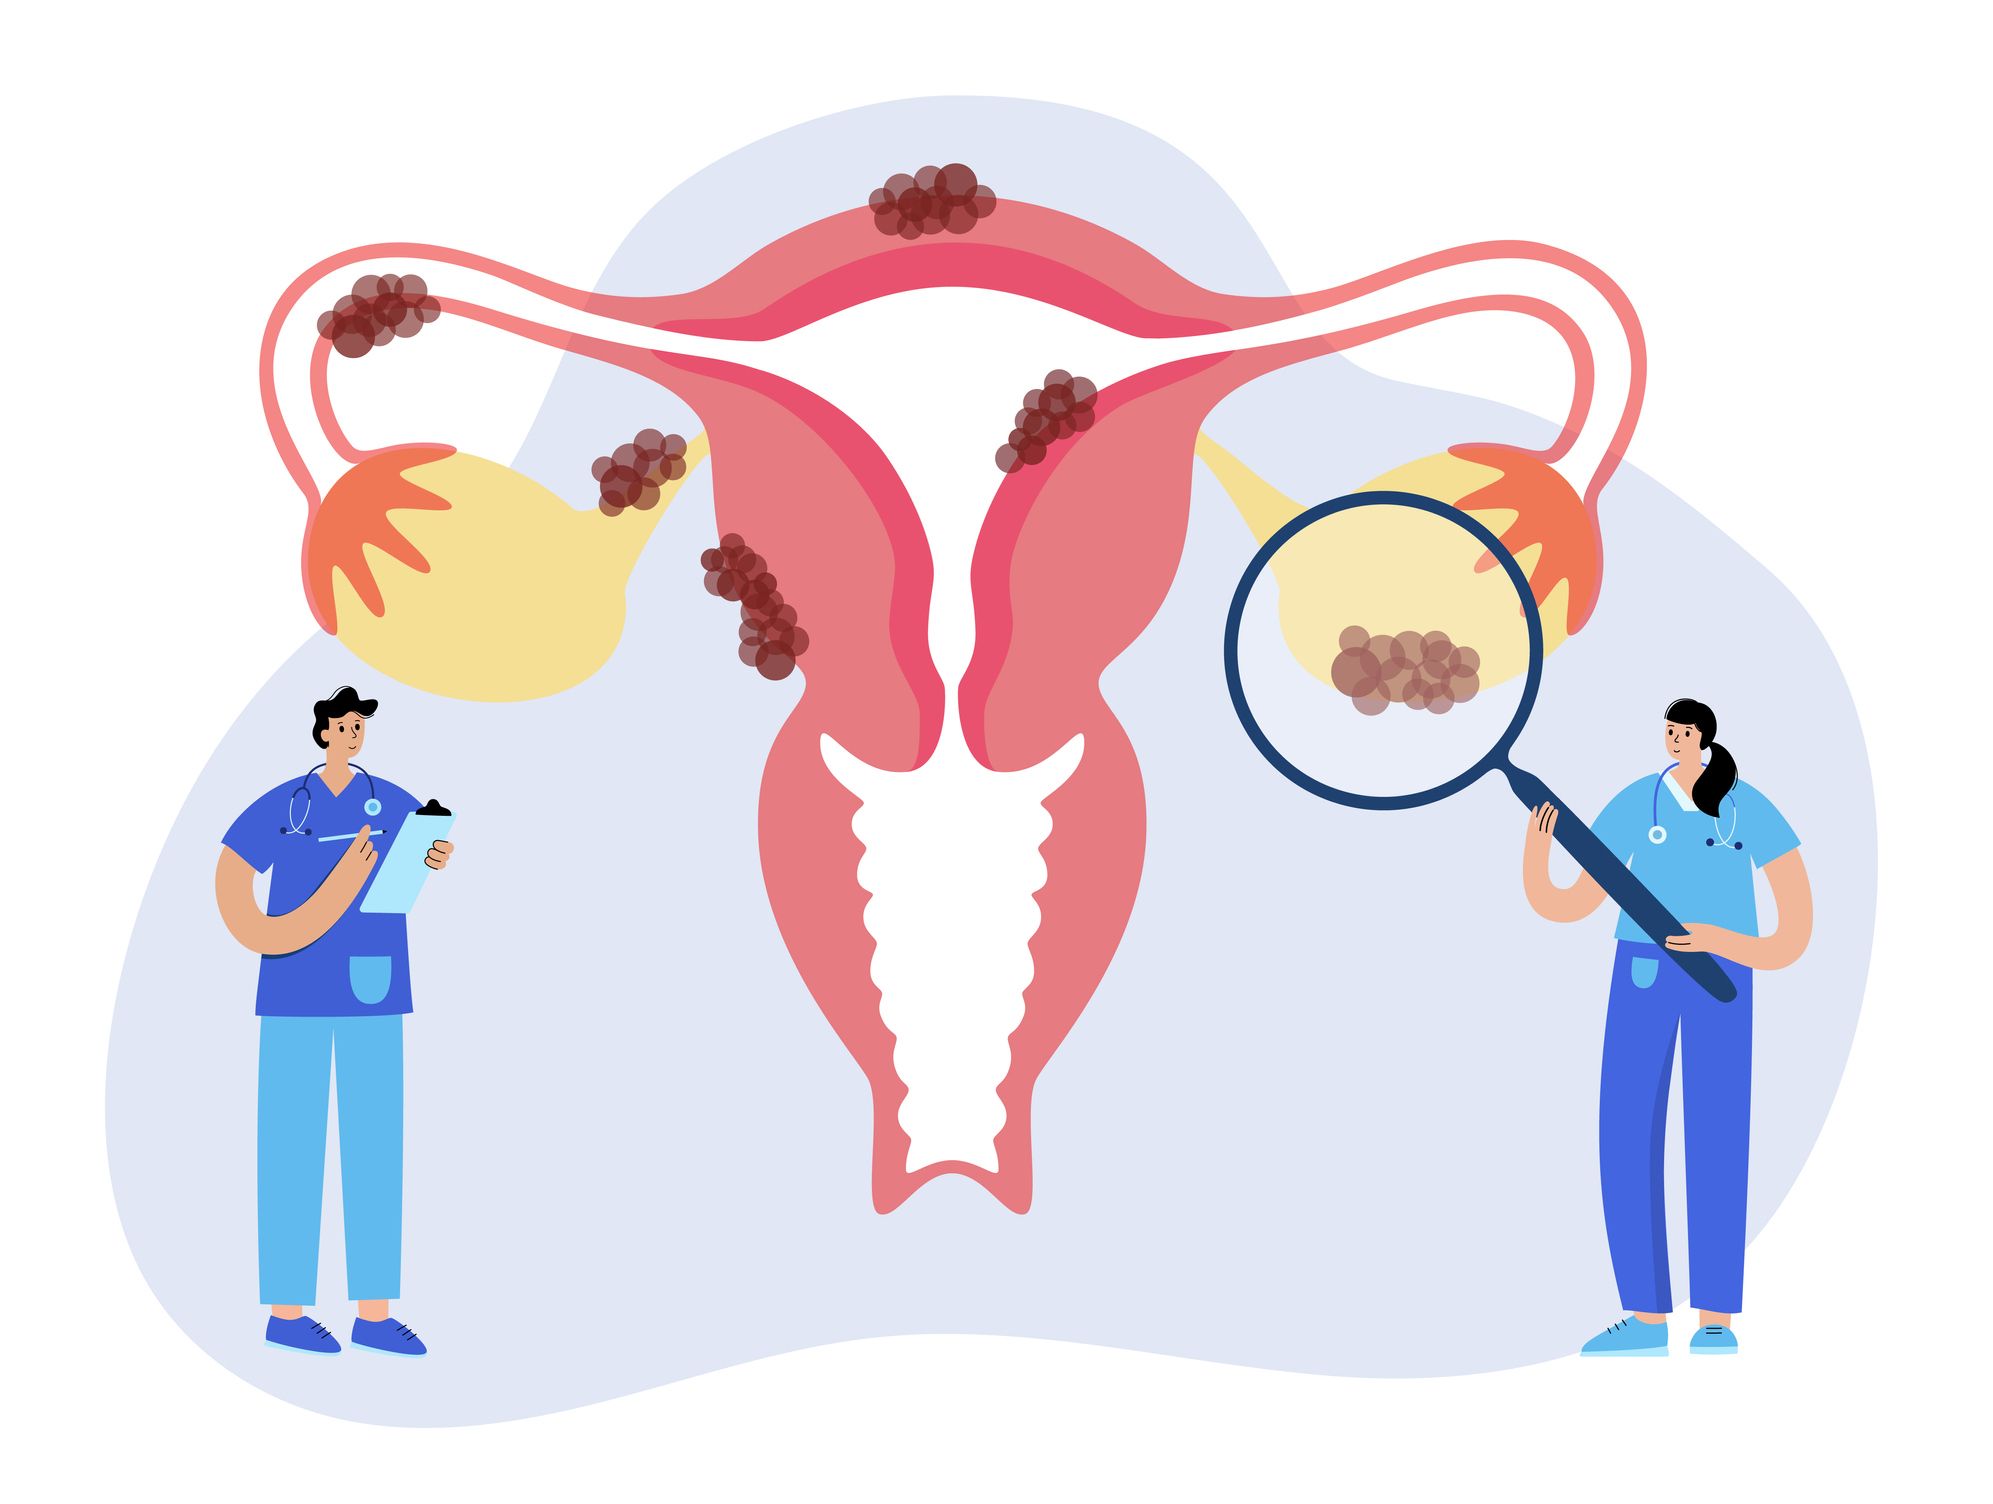 uterus anatomy, endometriosis cancer and tumor disease woman health medicine doctor gynecologist appointment, consultation, help, treatment female reproductive system flat vector illustration